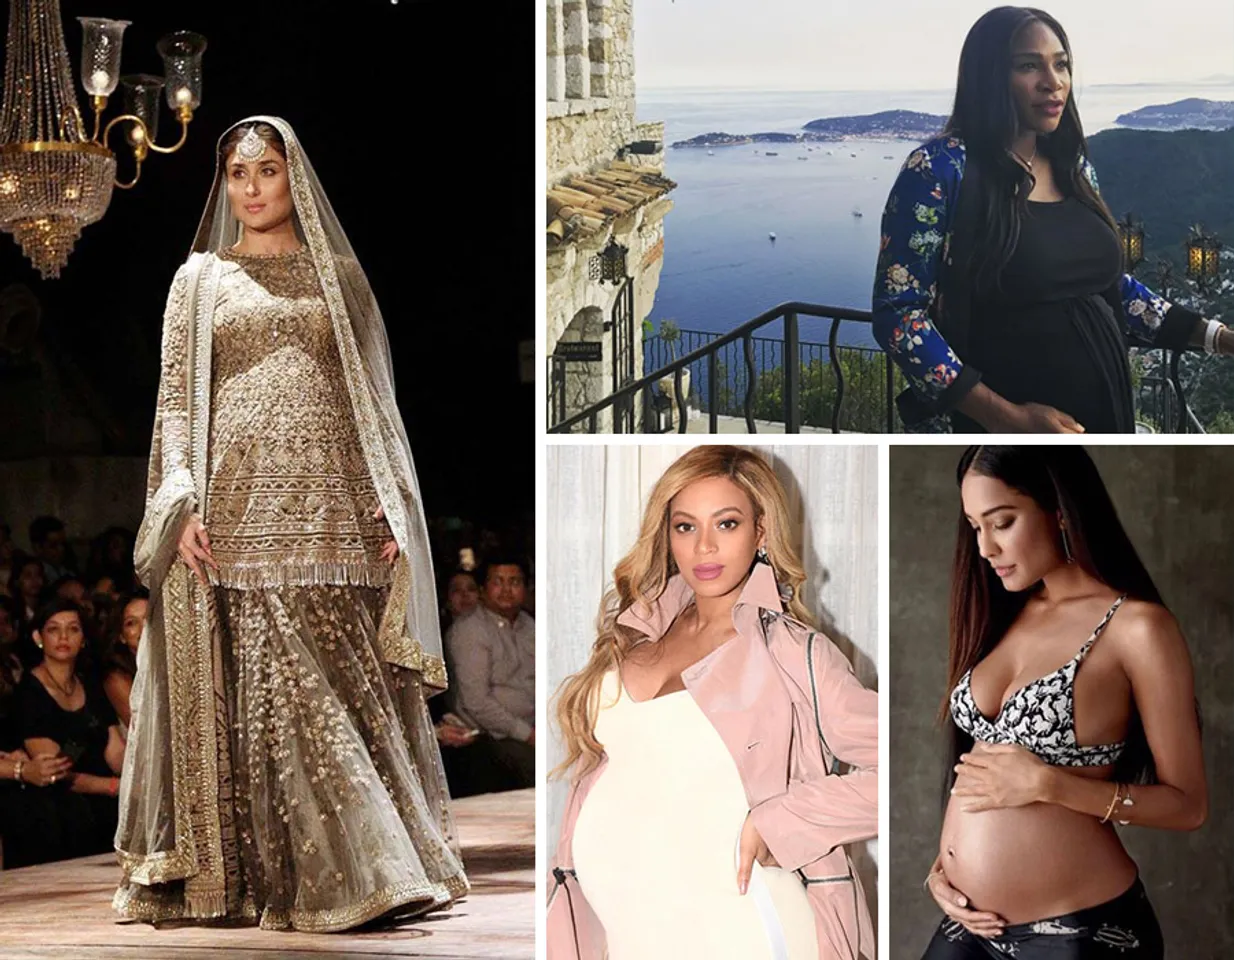 5 TIMES BABY BUMPS STOLE THE LIMELIGHT